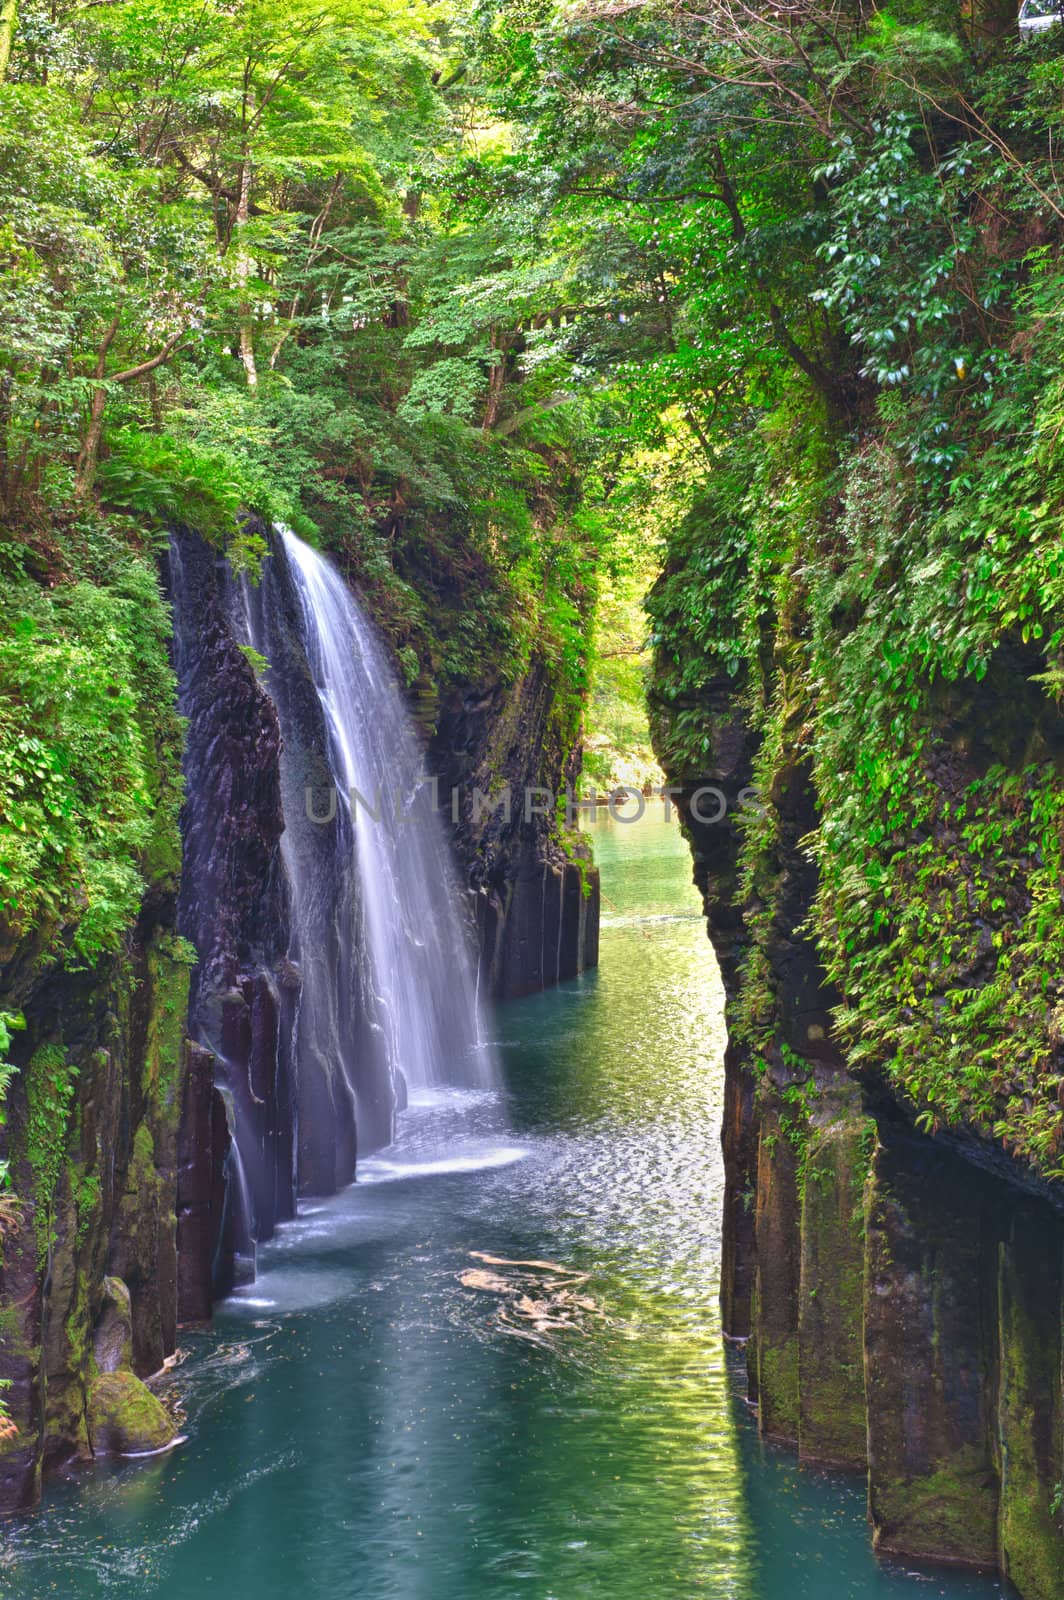 Takachiho gorge by fyletto